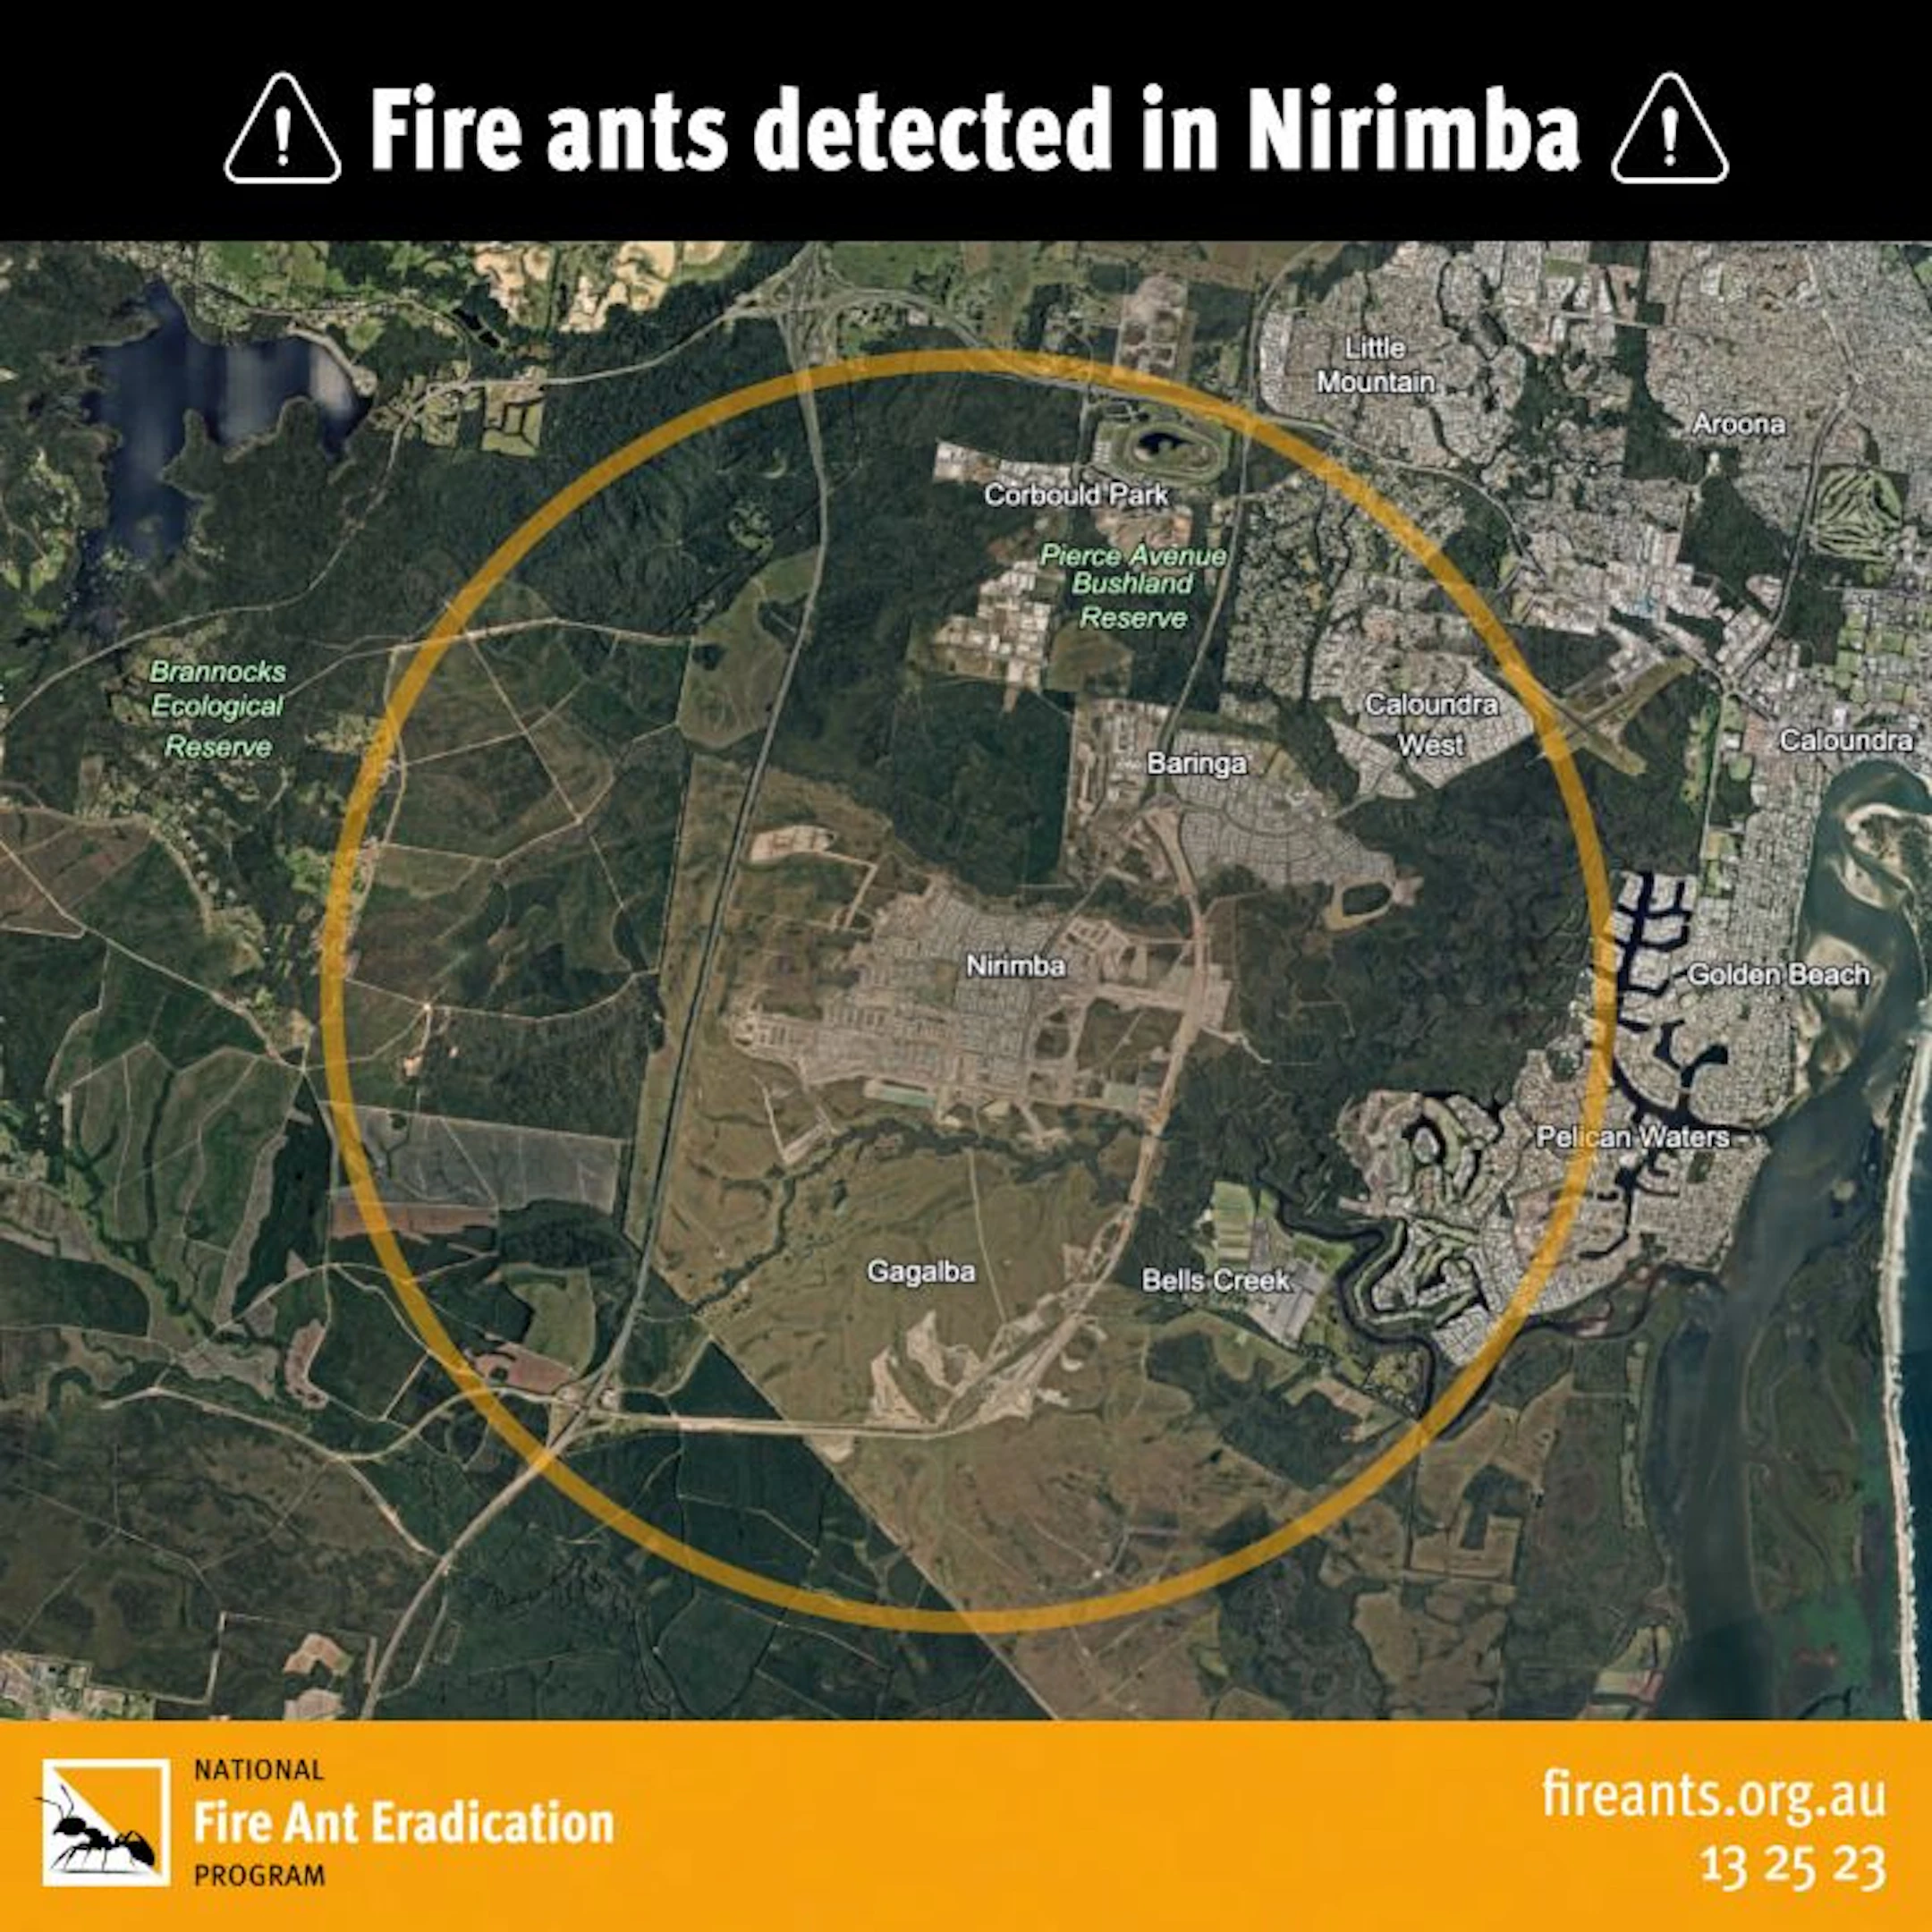 DAF map of Nirimba. Image credit: Department of Agriculture and Fisheries, Queensland Government. Used with permission